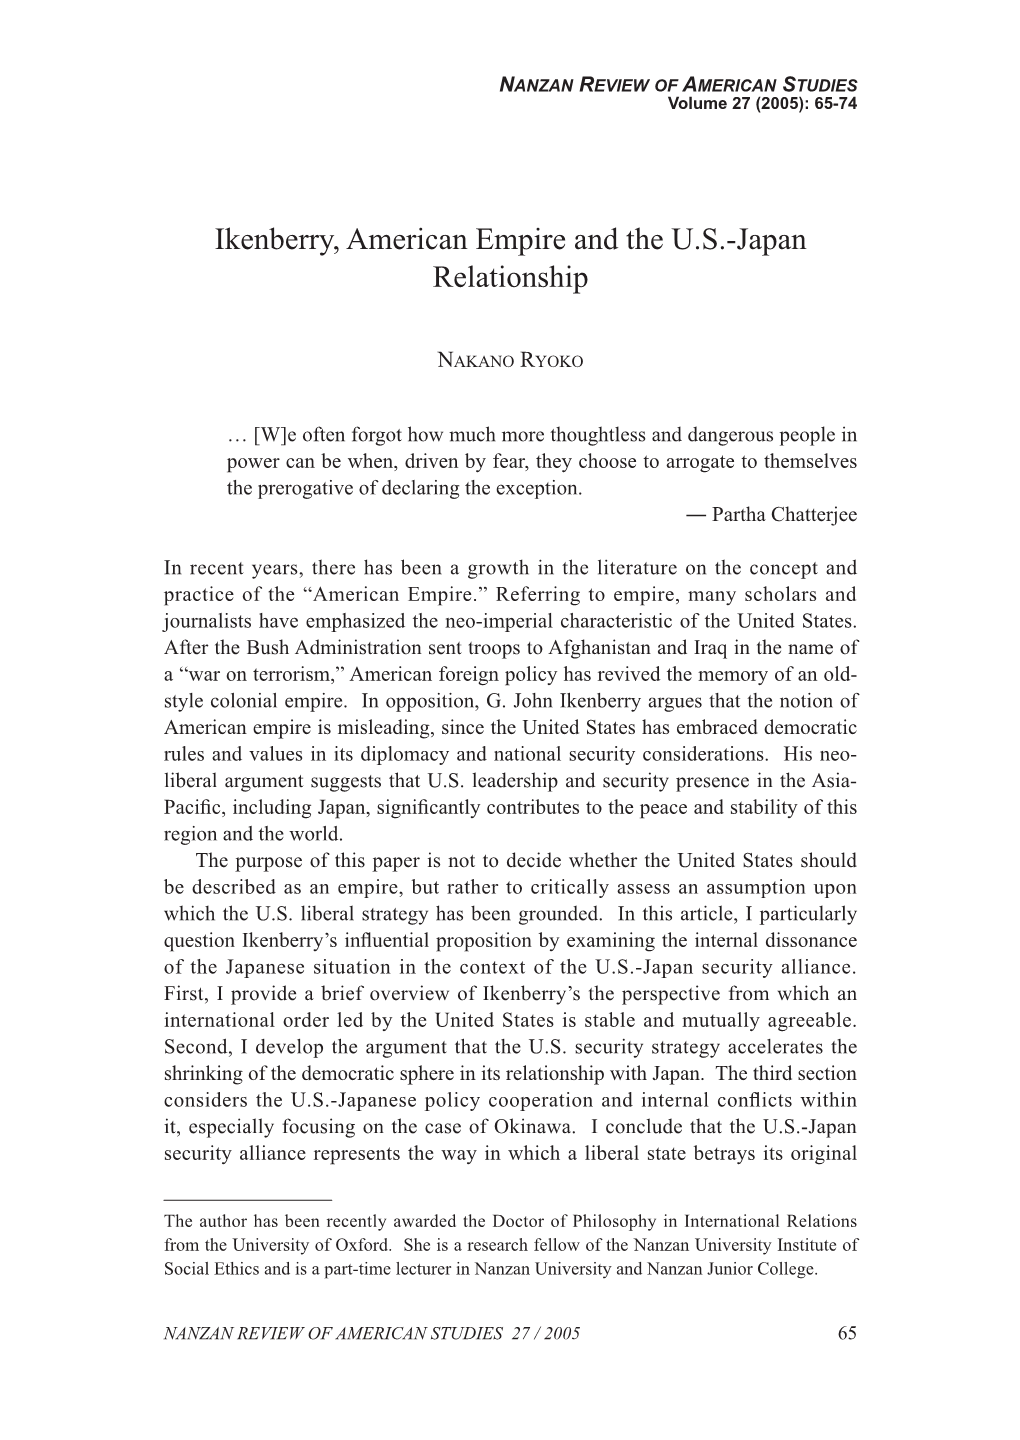 Ikenberry, American Empire and the U.S.-Japan Relationship